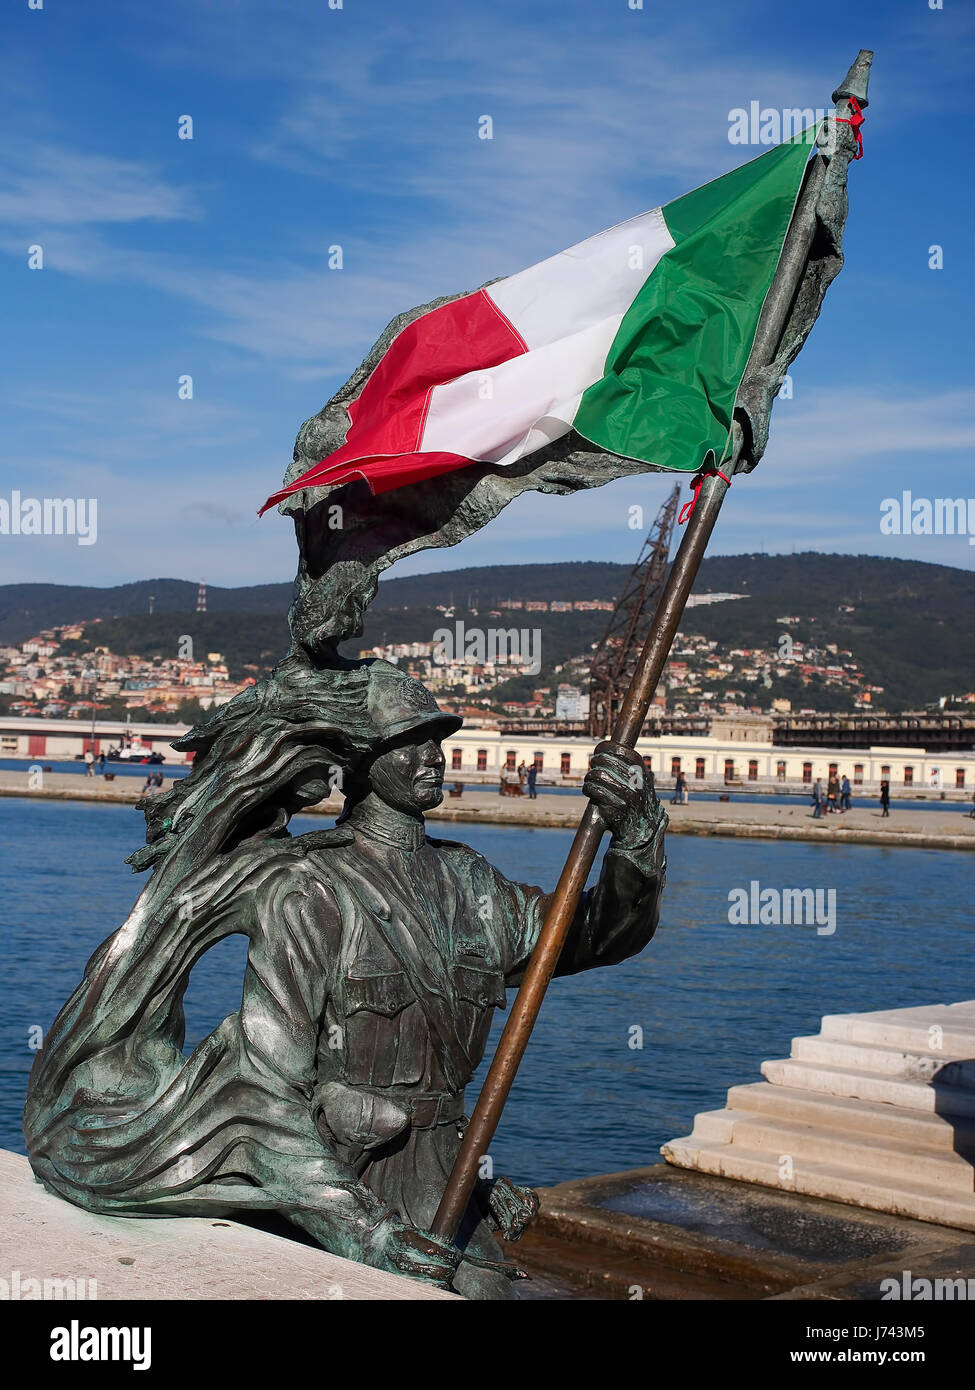 The italian flag on the statue of a bersagliere (anniversary of the liberation of Trieste). Stock Photo